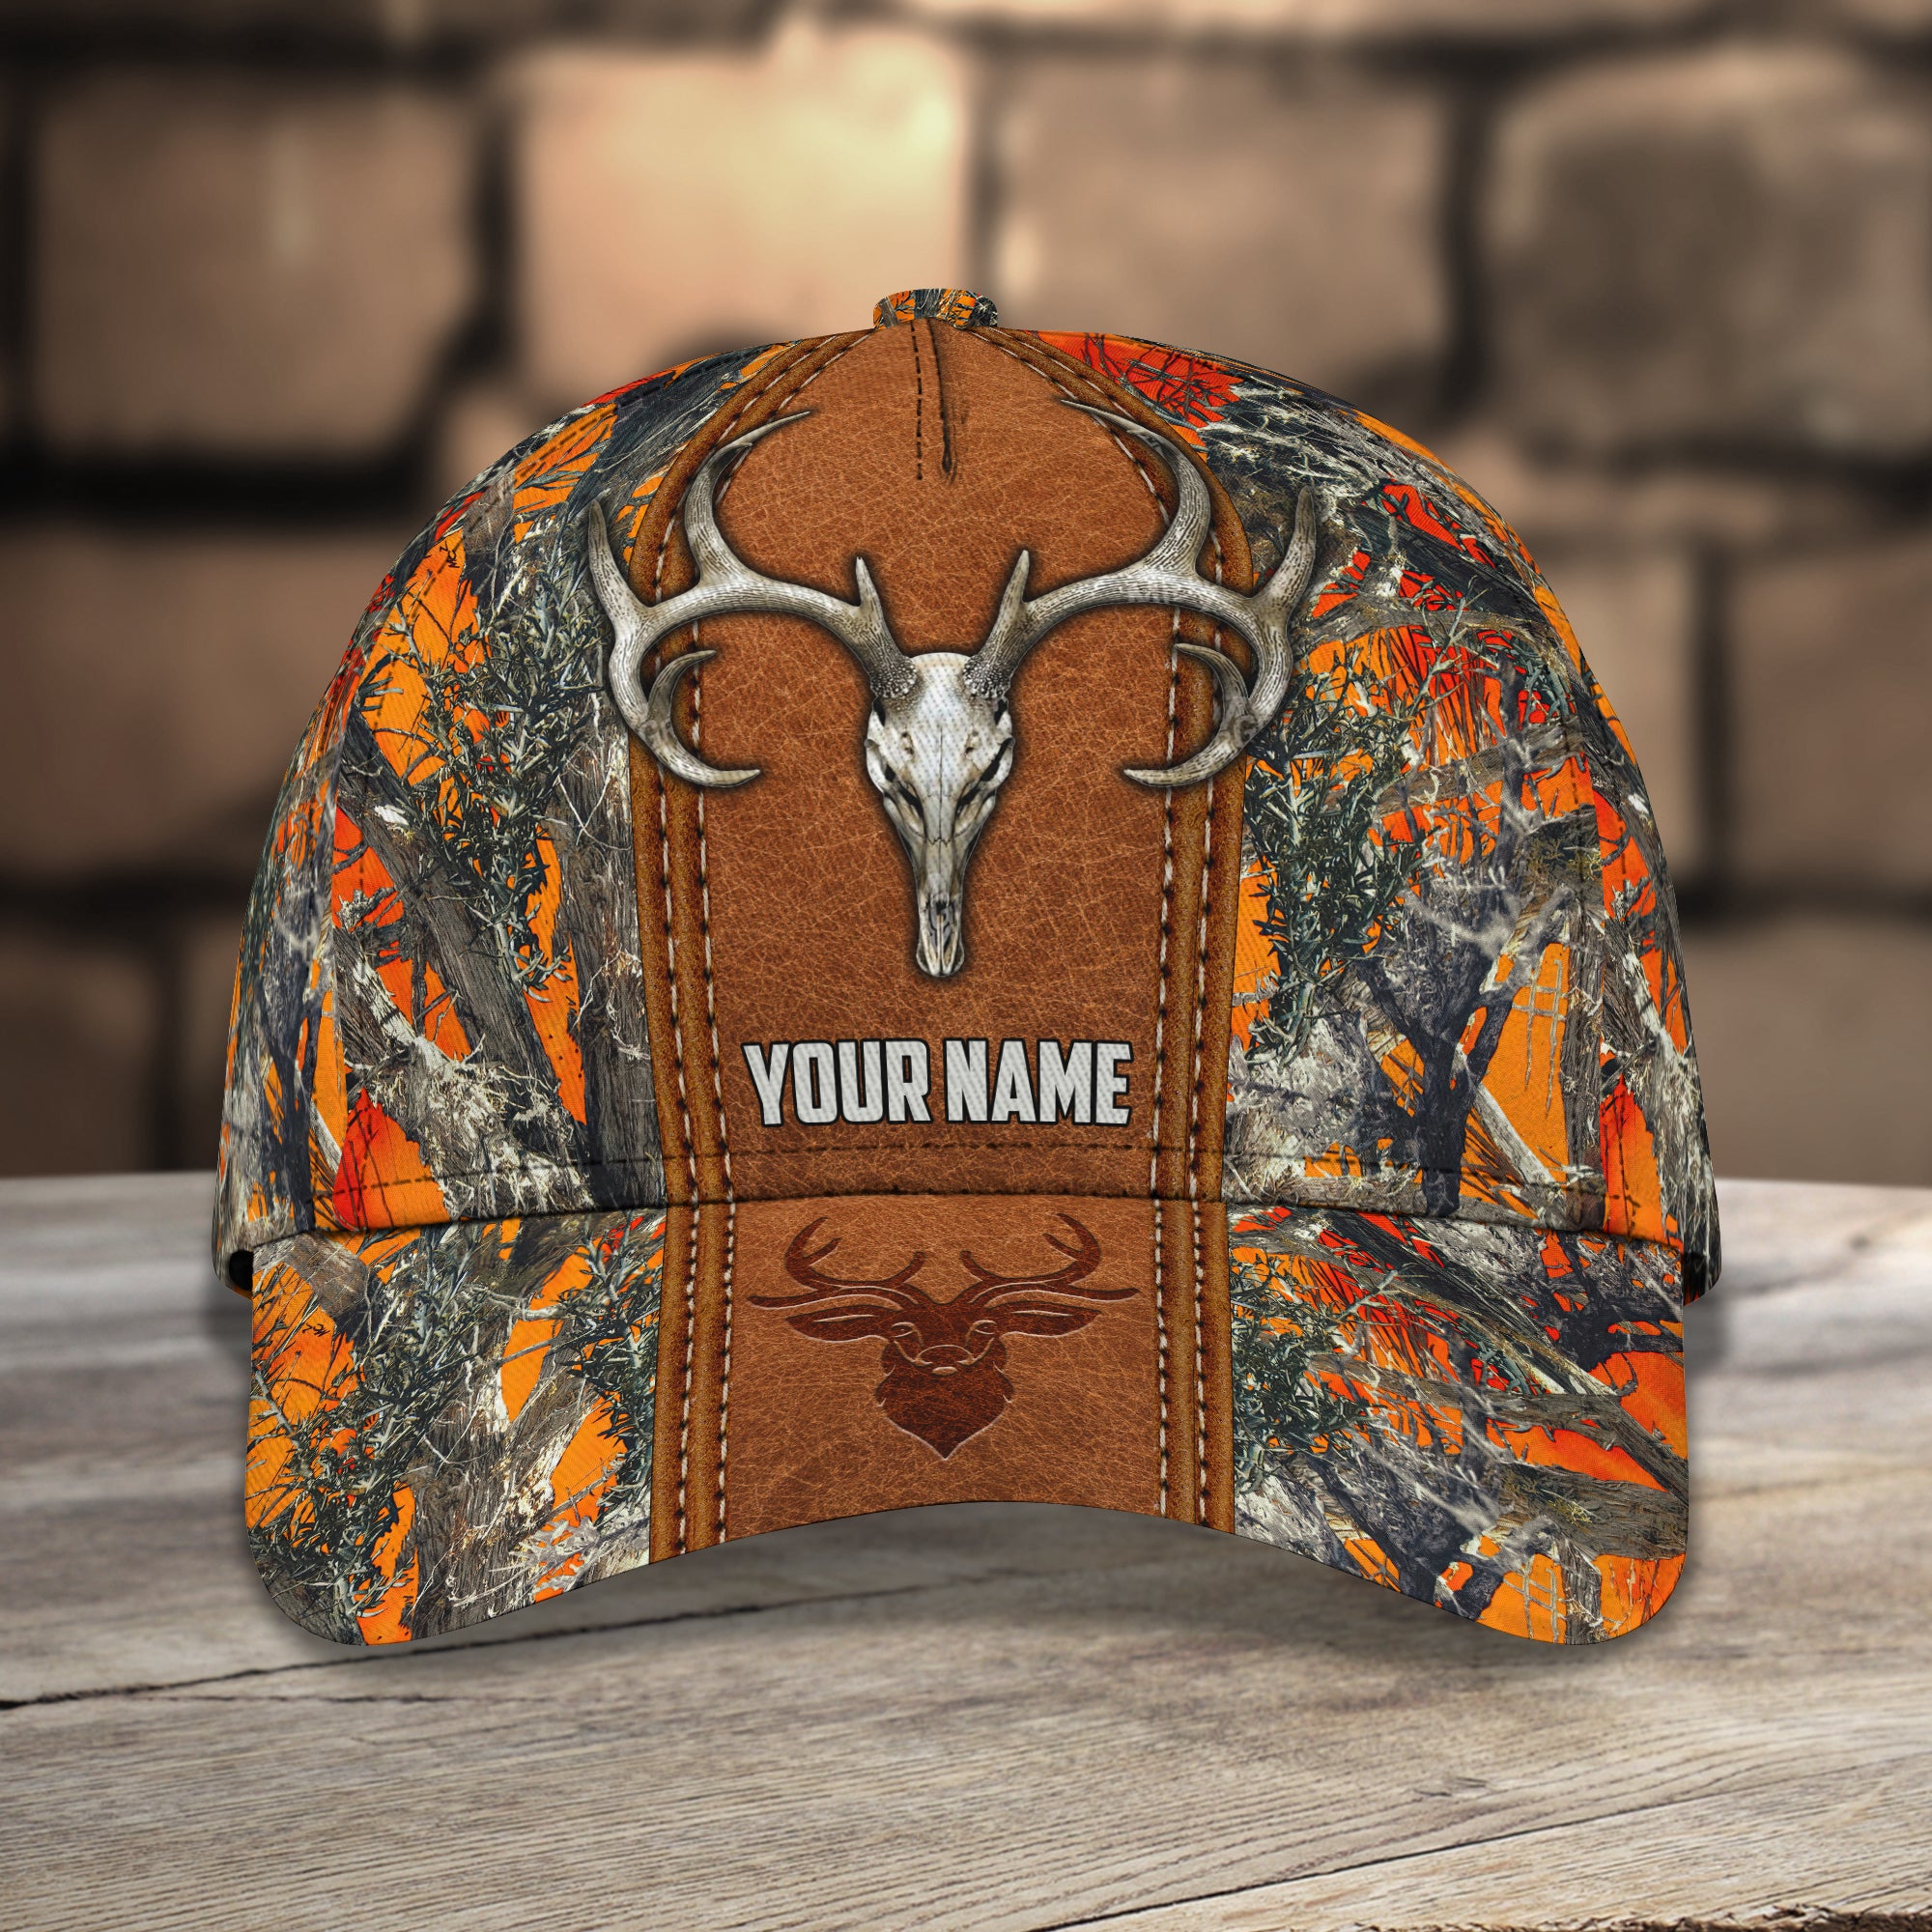 Hunting - Personalized Name Cap 02 - RINC98